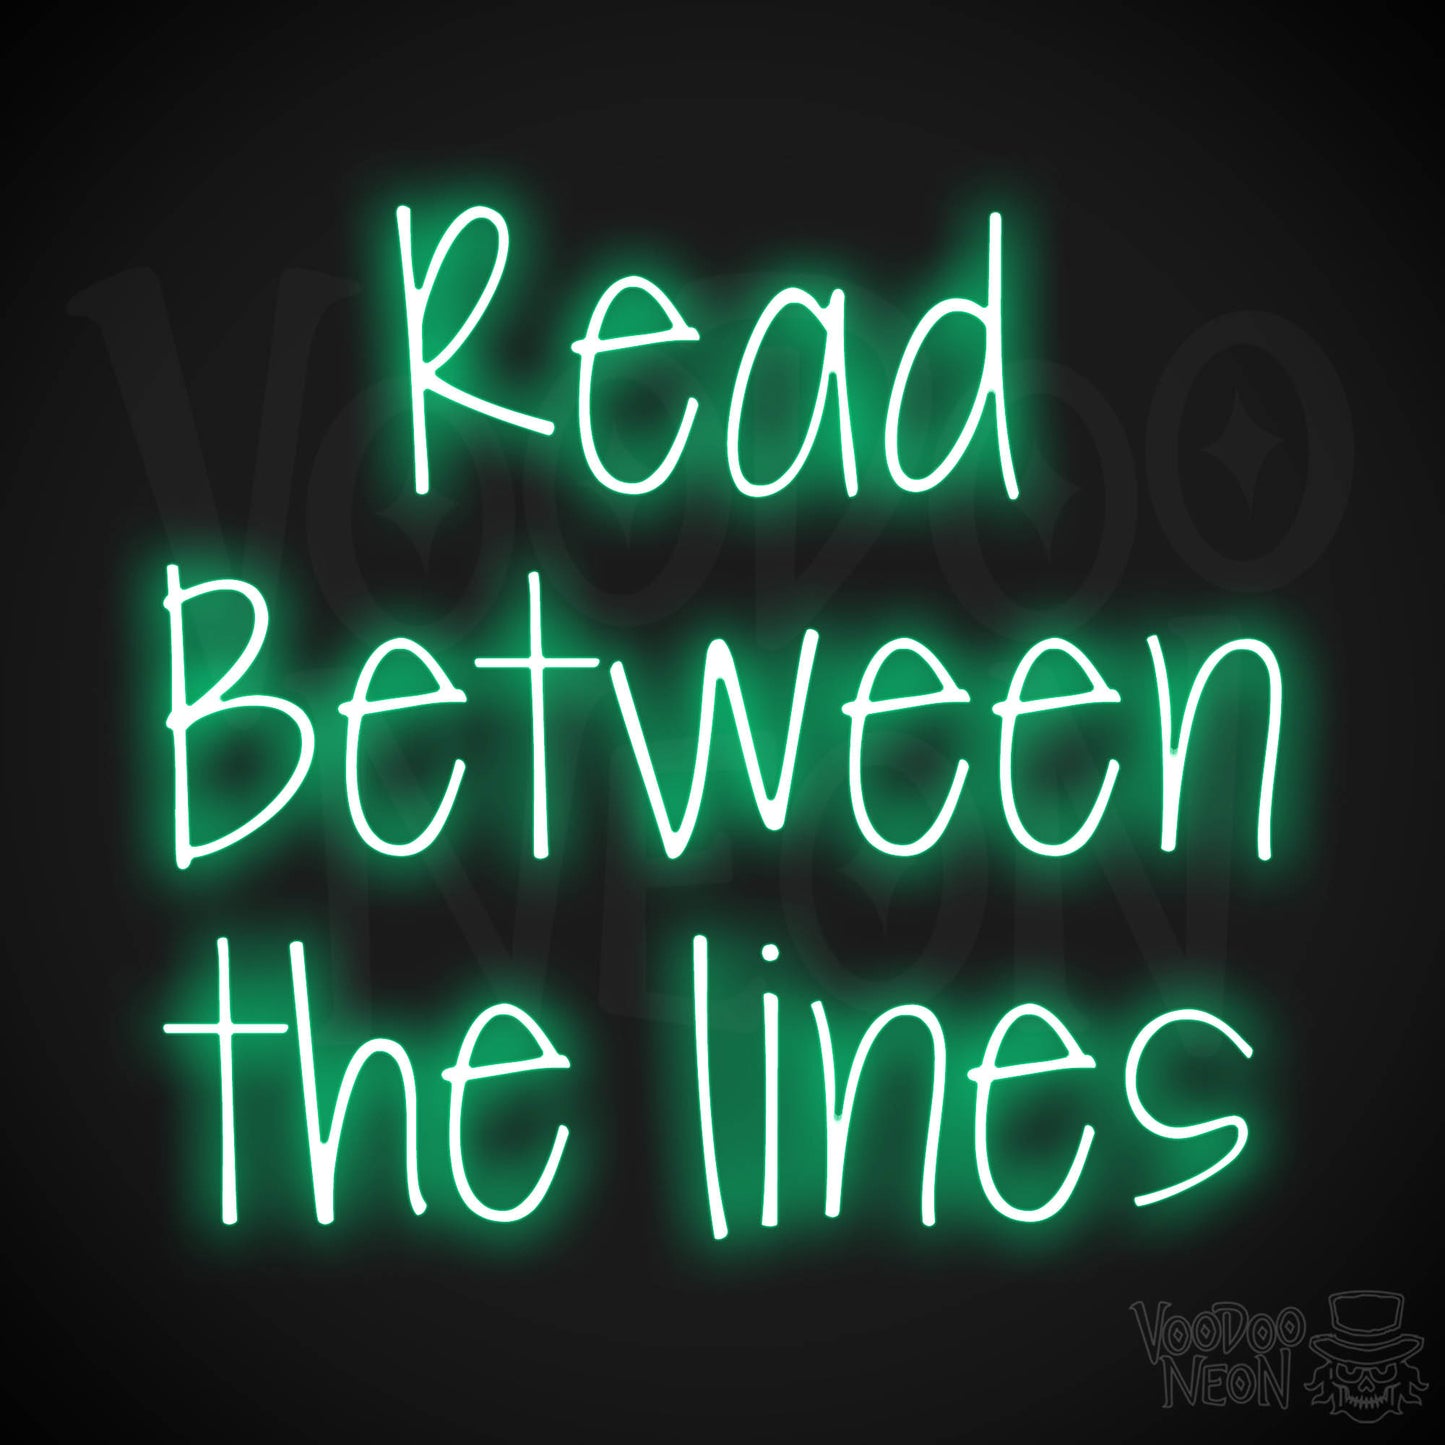 Read Between The Lines LED Neon - Green